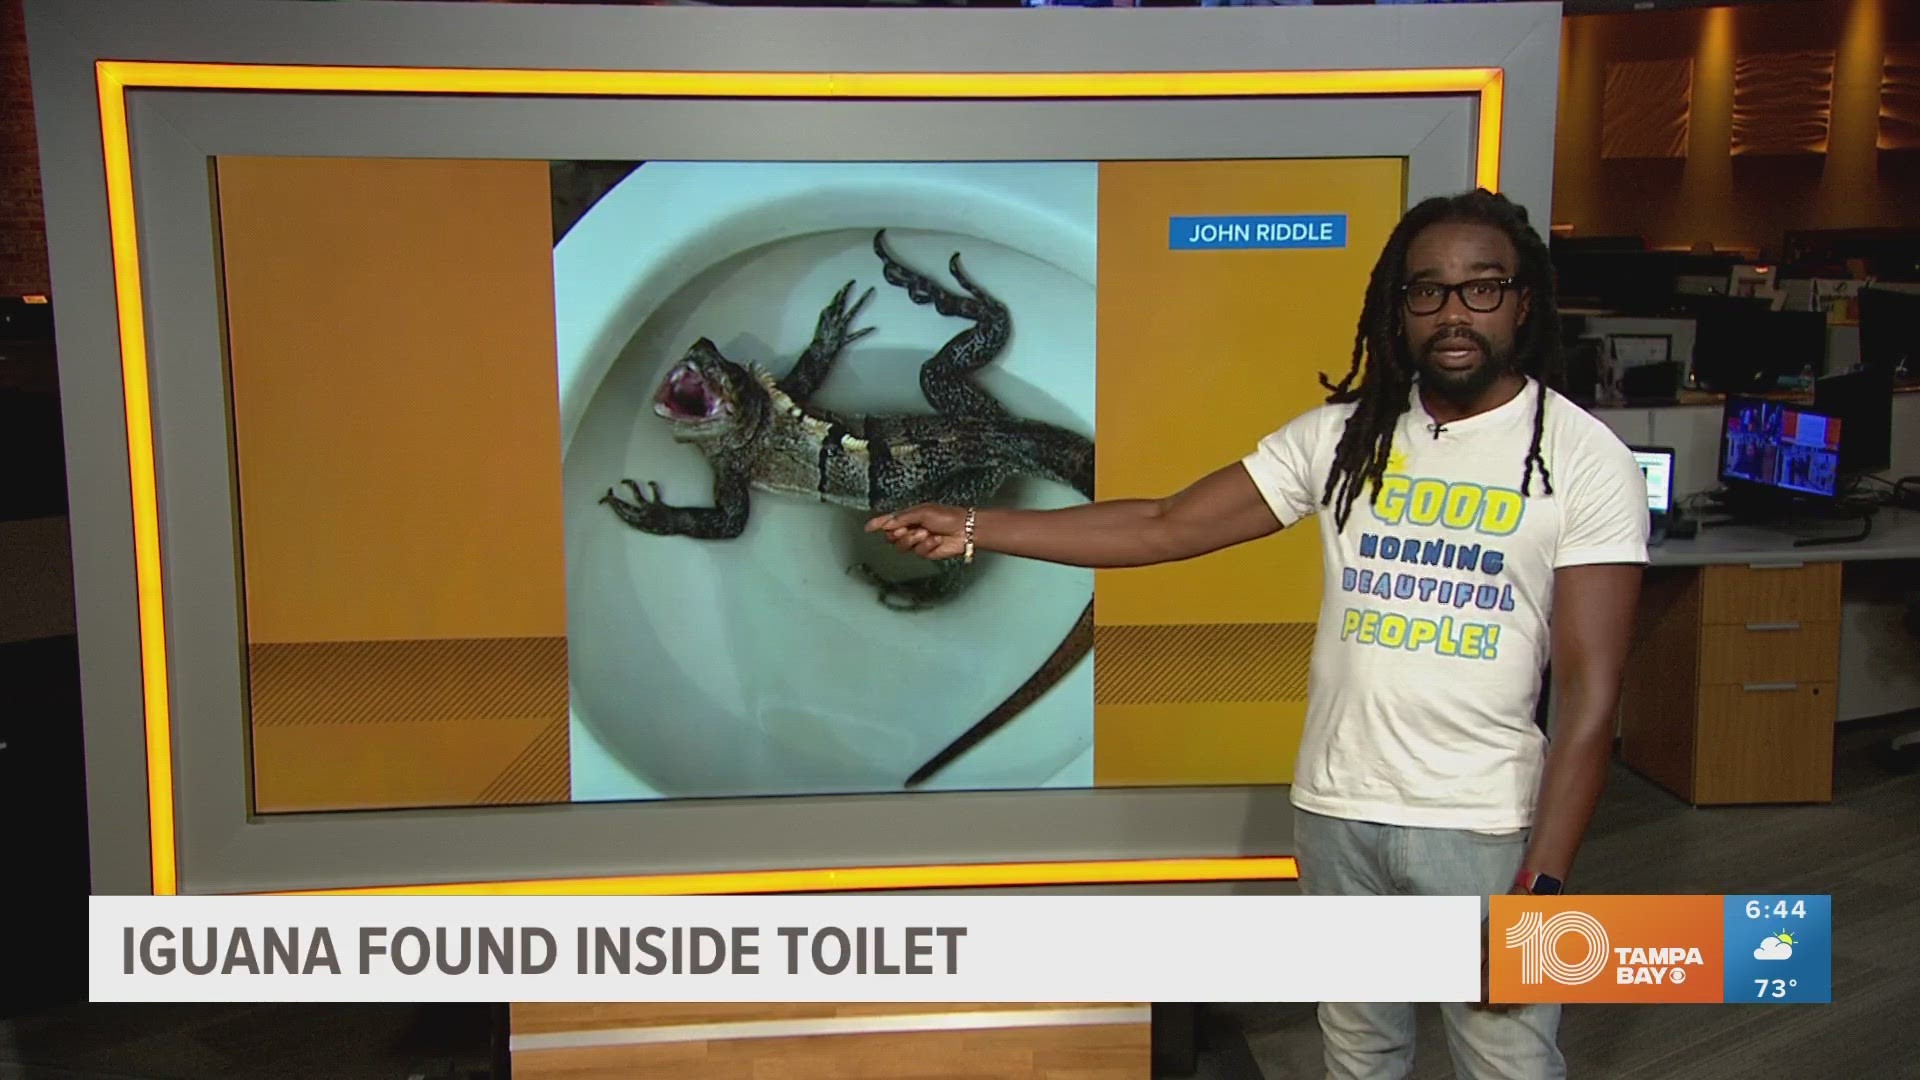 John Riddle told the South Florida SunSentinel that he is used to seeing iguanas, but he is just not used to seeing them in his toilet bowl.